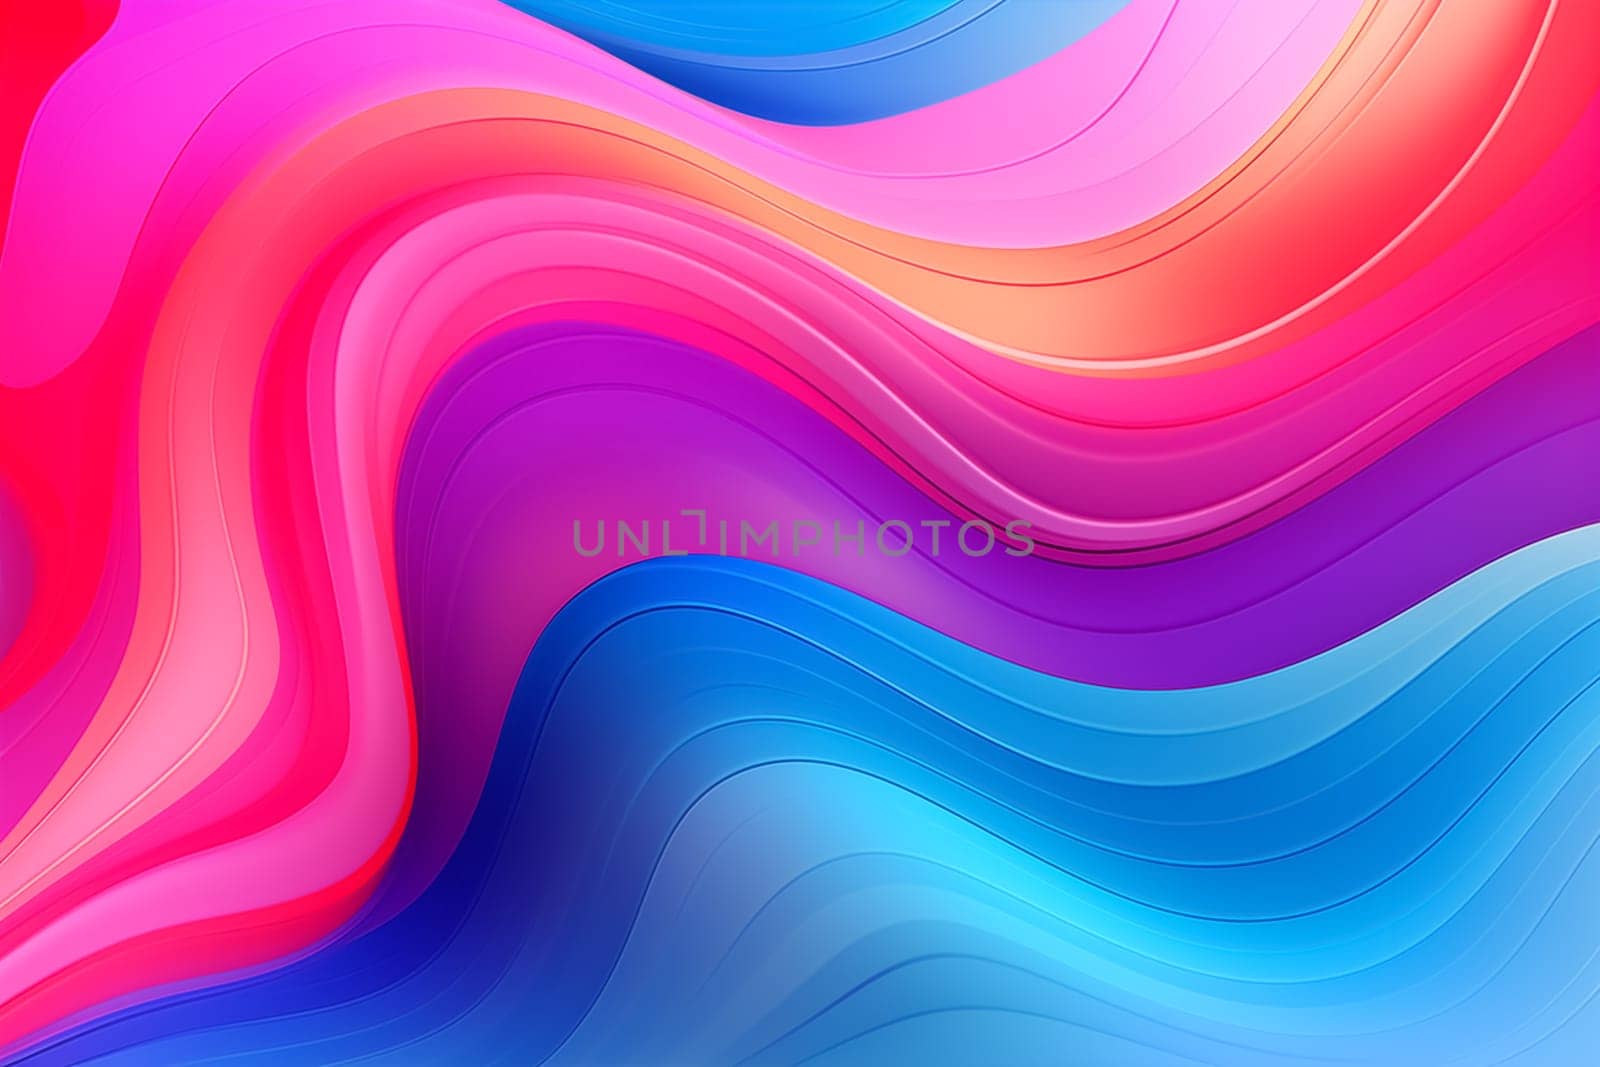 Abstract fluid background design. liquid color trendy backdrop by Nadtochiy